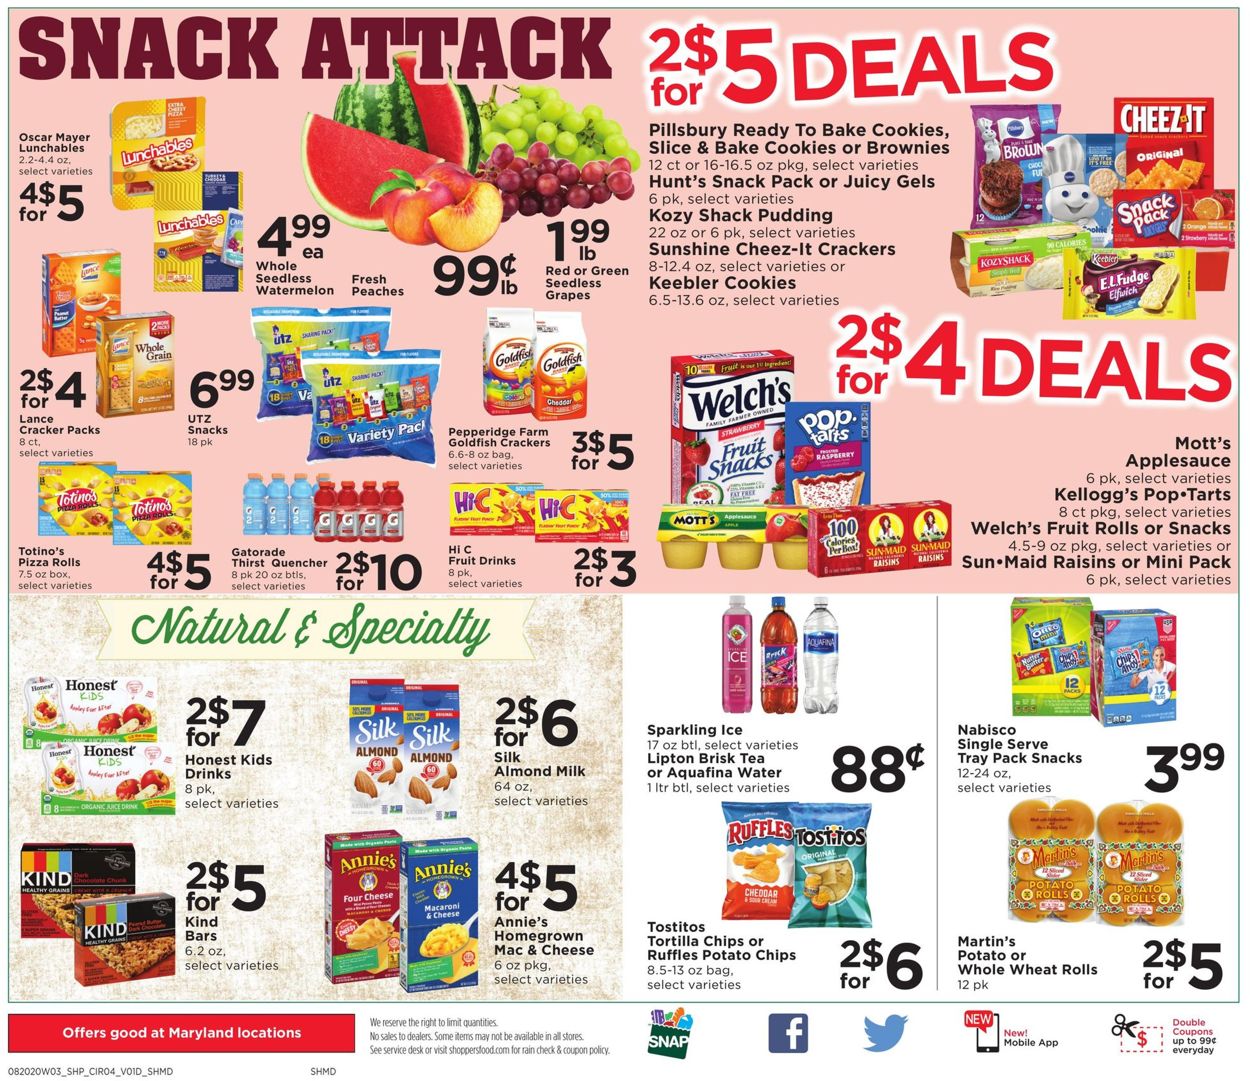 Shoppers Food & Pharmacy Ad from 08/20/2020